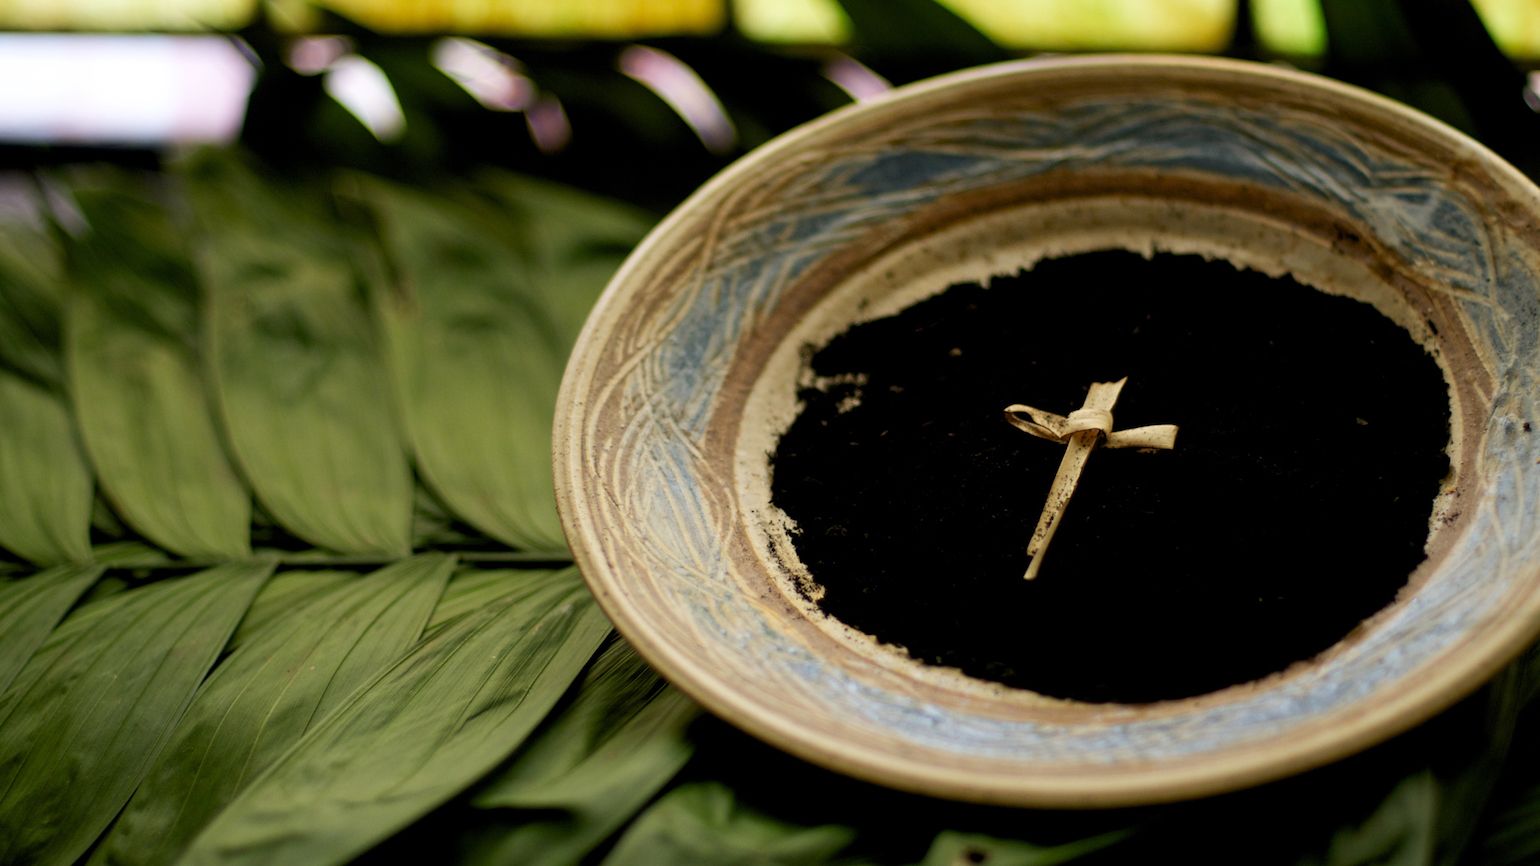 Ashes and a cross in a bowl on top of palm fronds for an ash wednesday reflection service